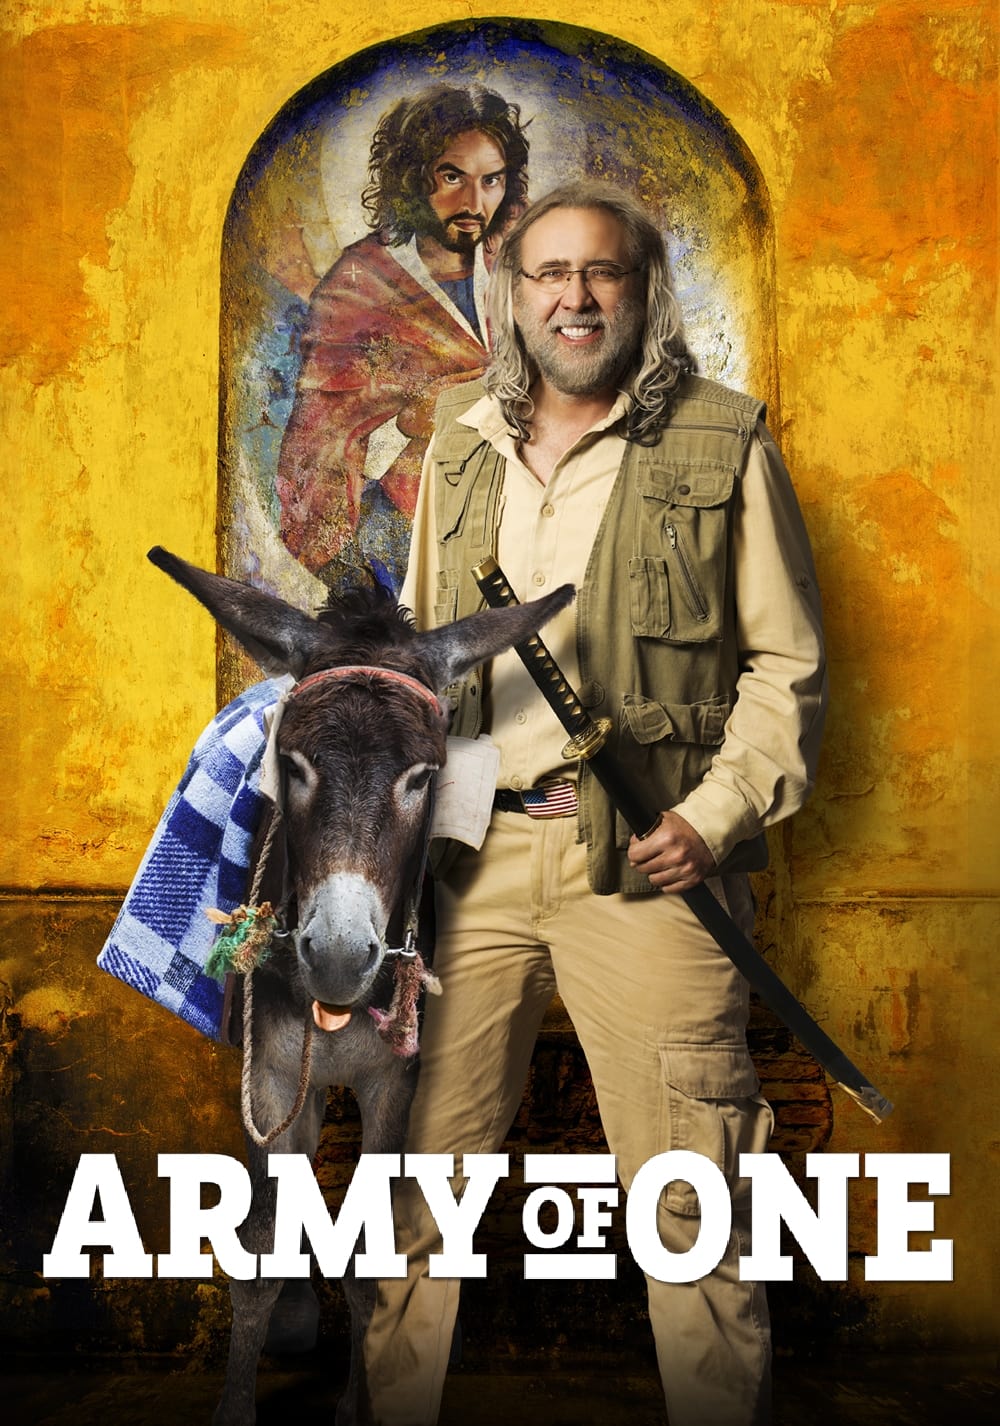 Army of One (2016)